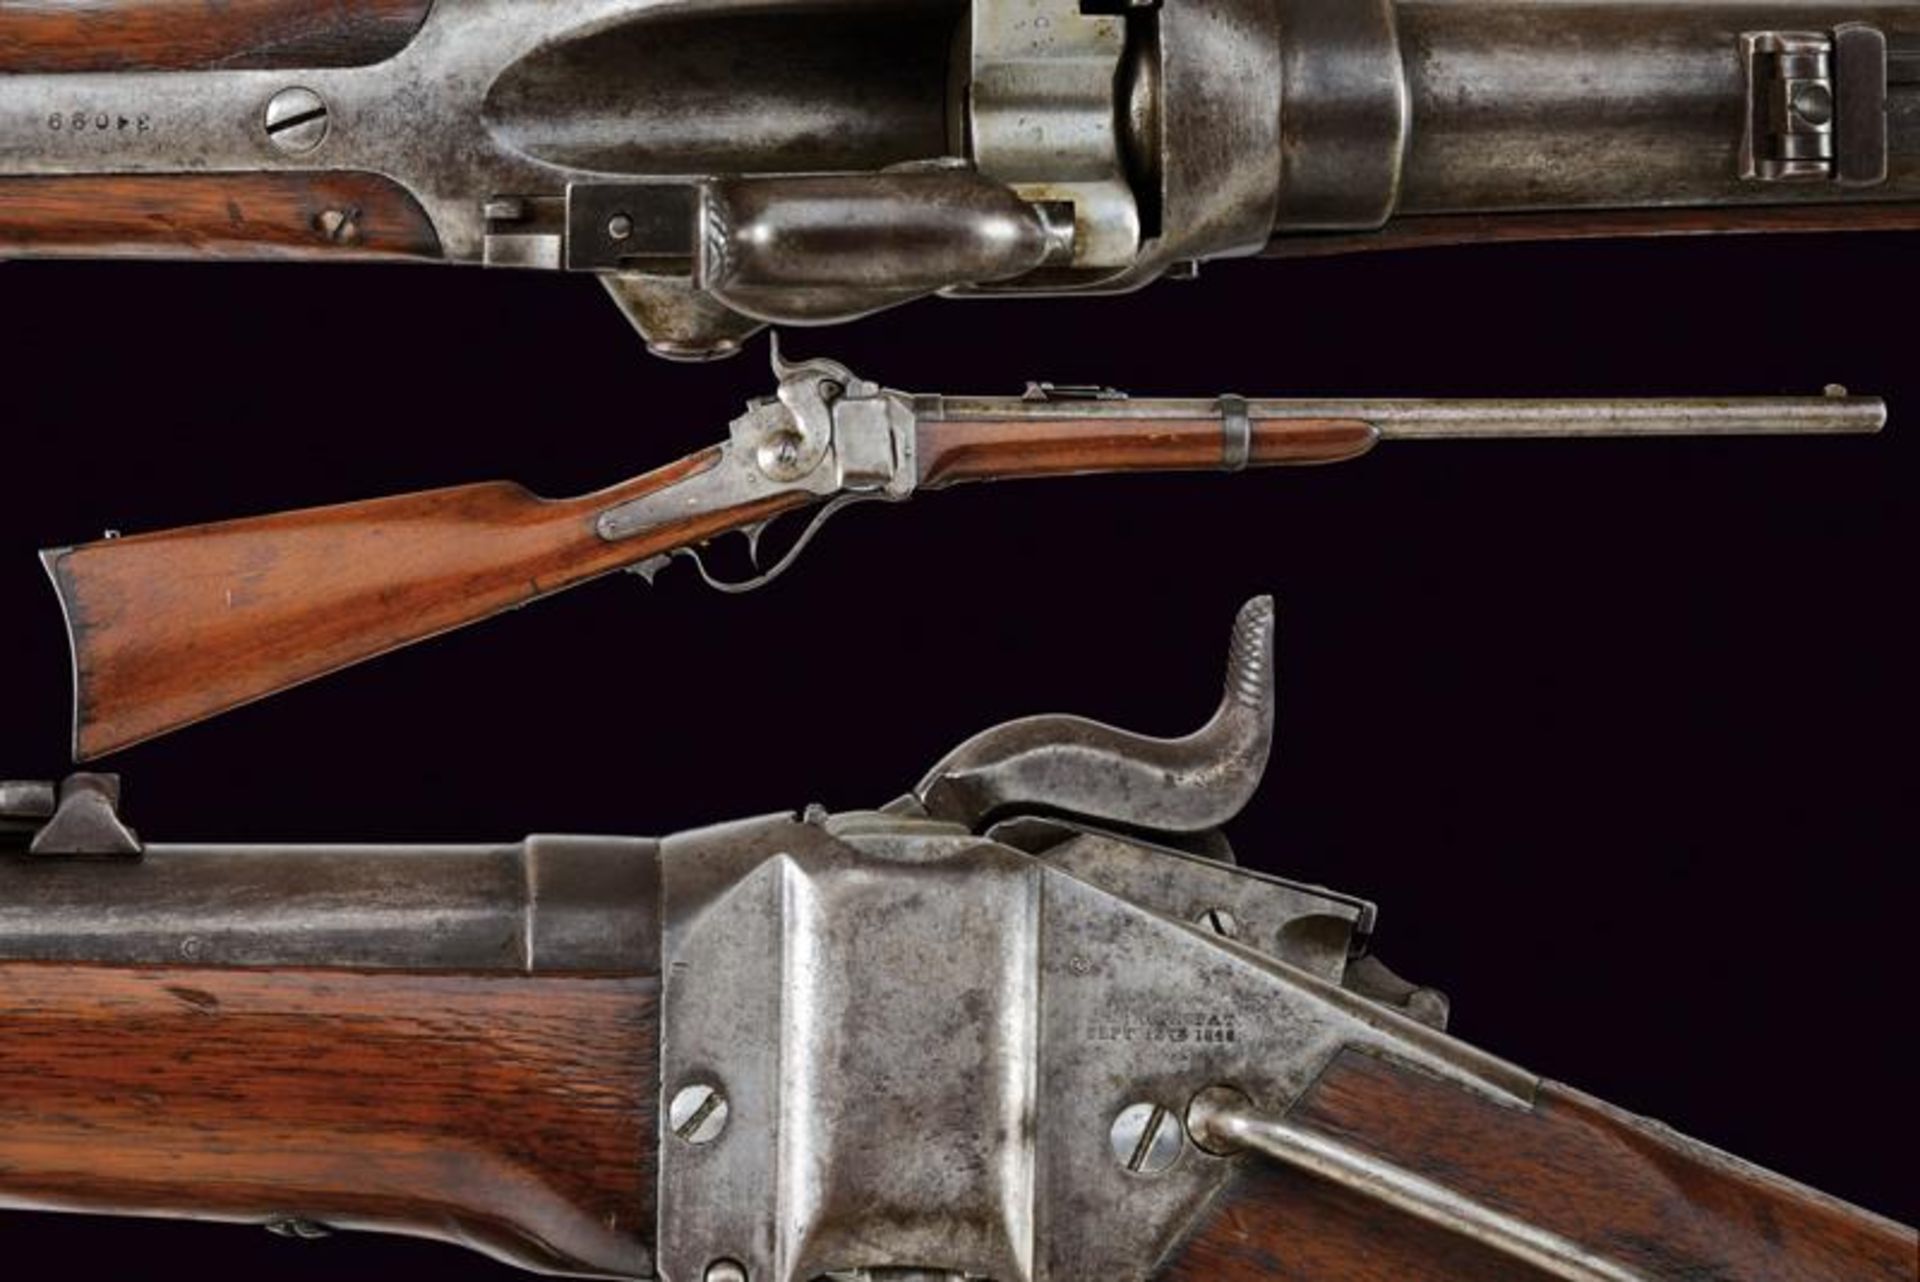 A 1859 Sharps New Model Carbine converted to metallic cartridge